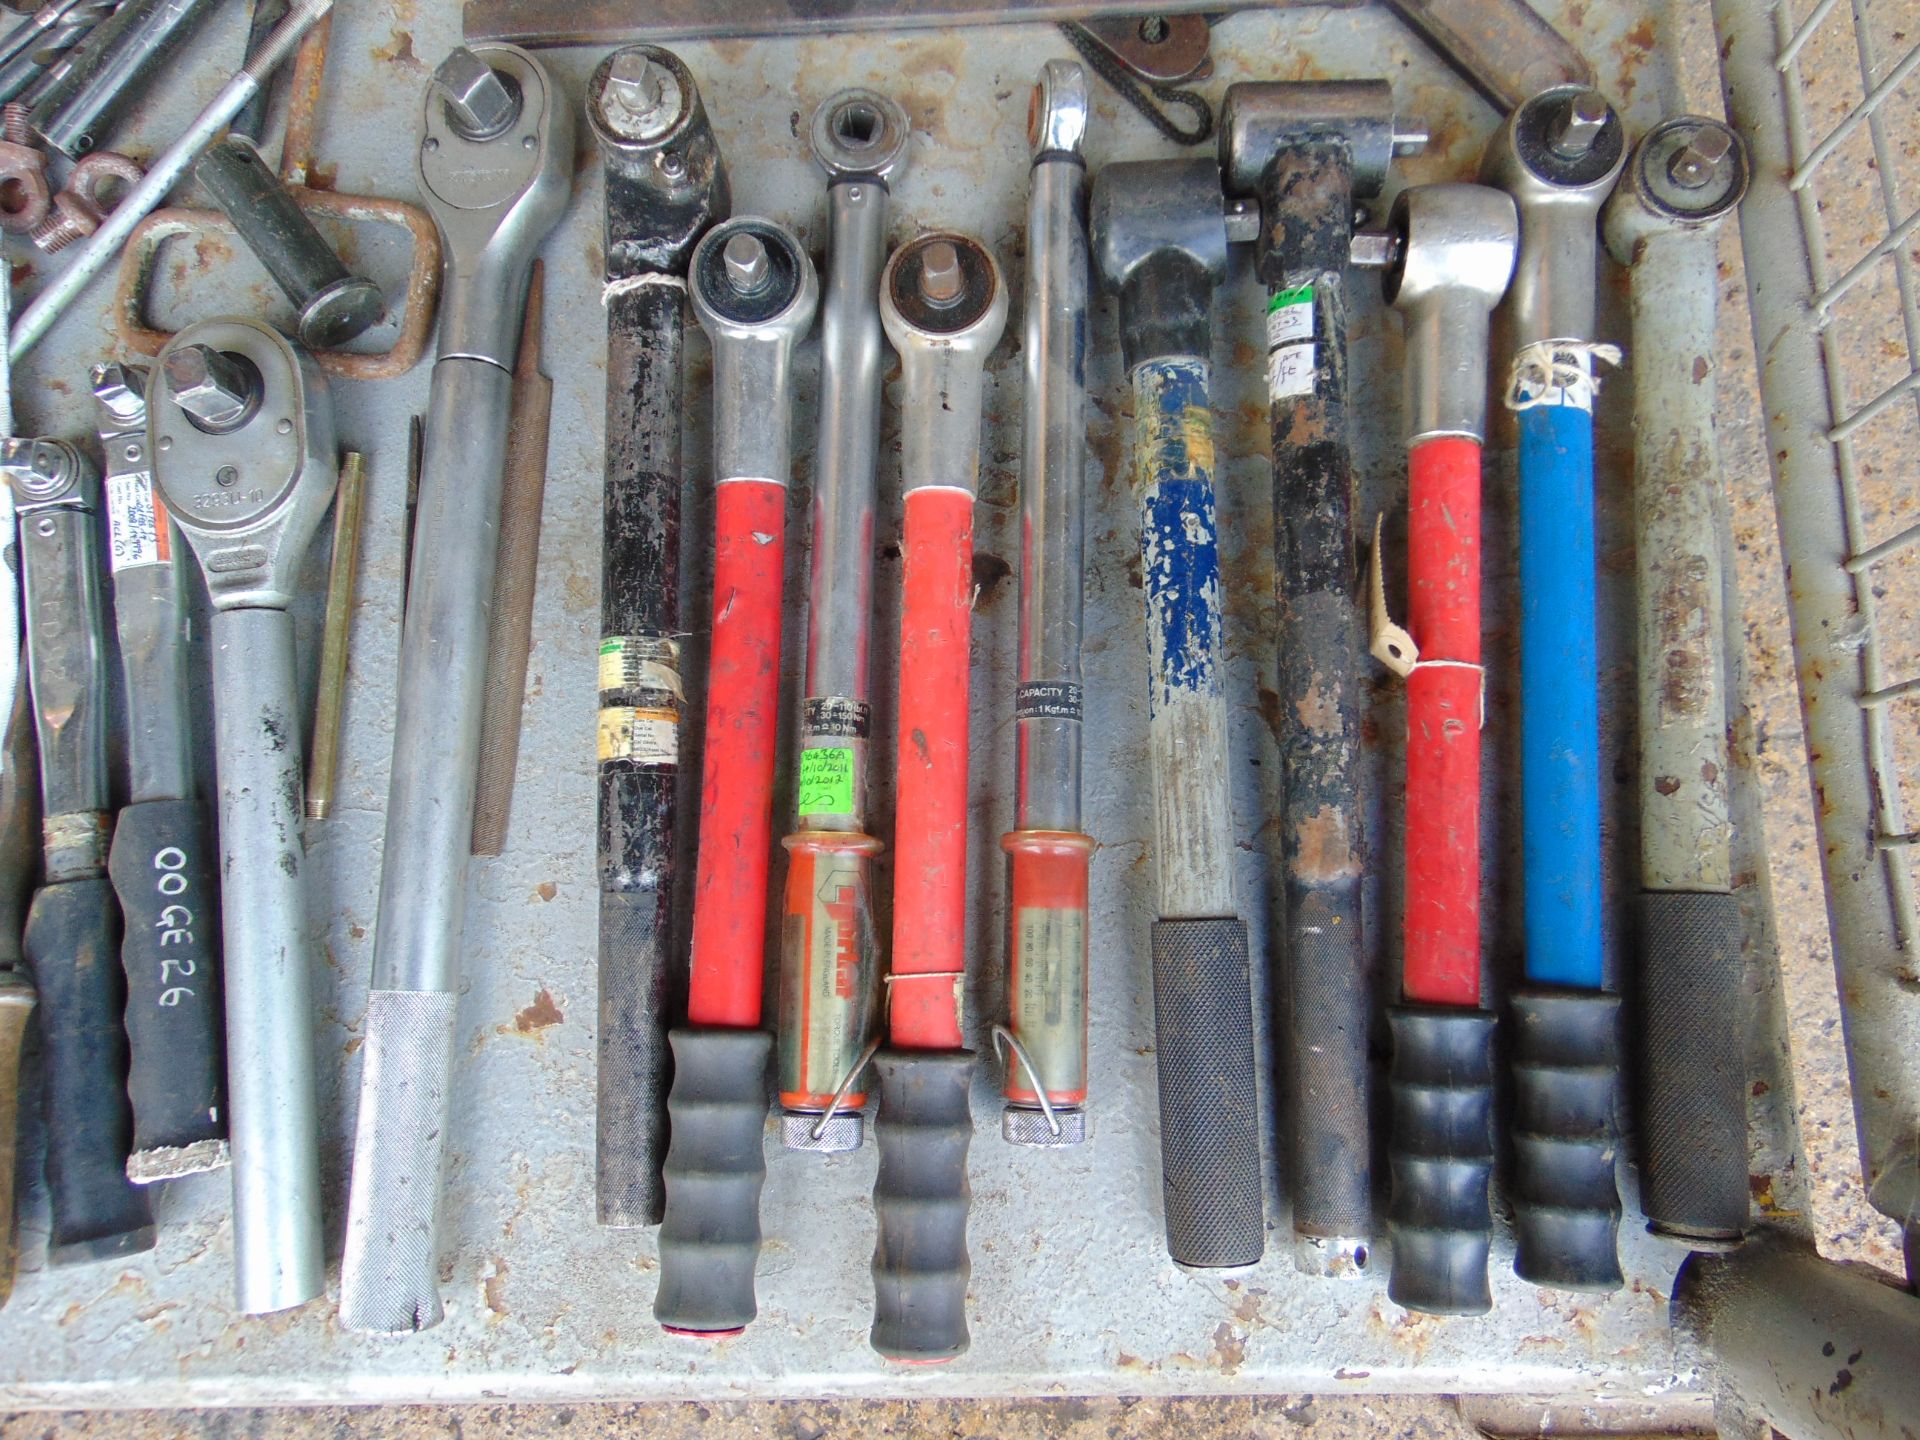 Stillage of Assorted Tools - Chisels, Files, Torque Wrench etc. - Image 4 of 6